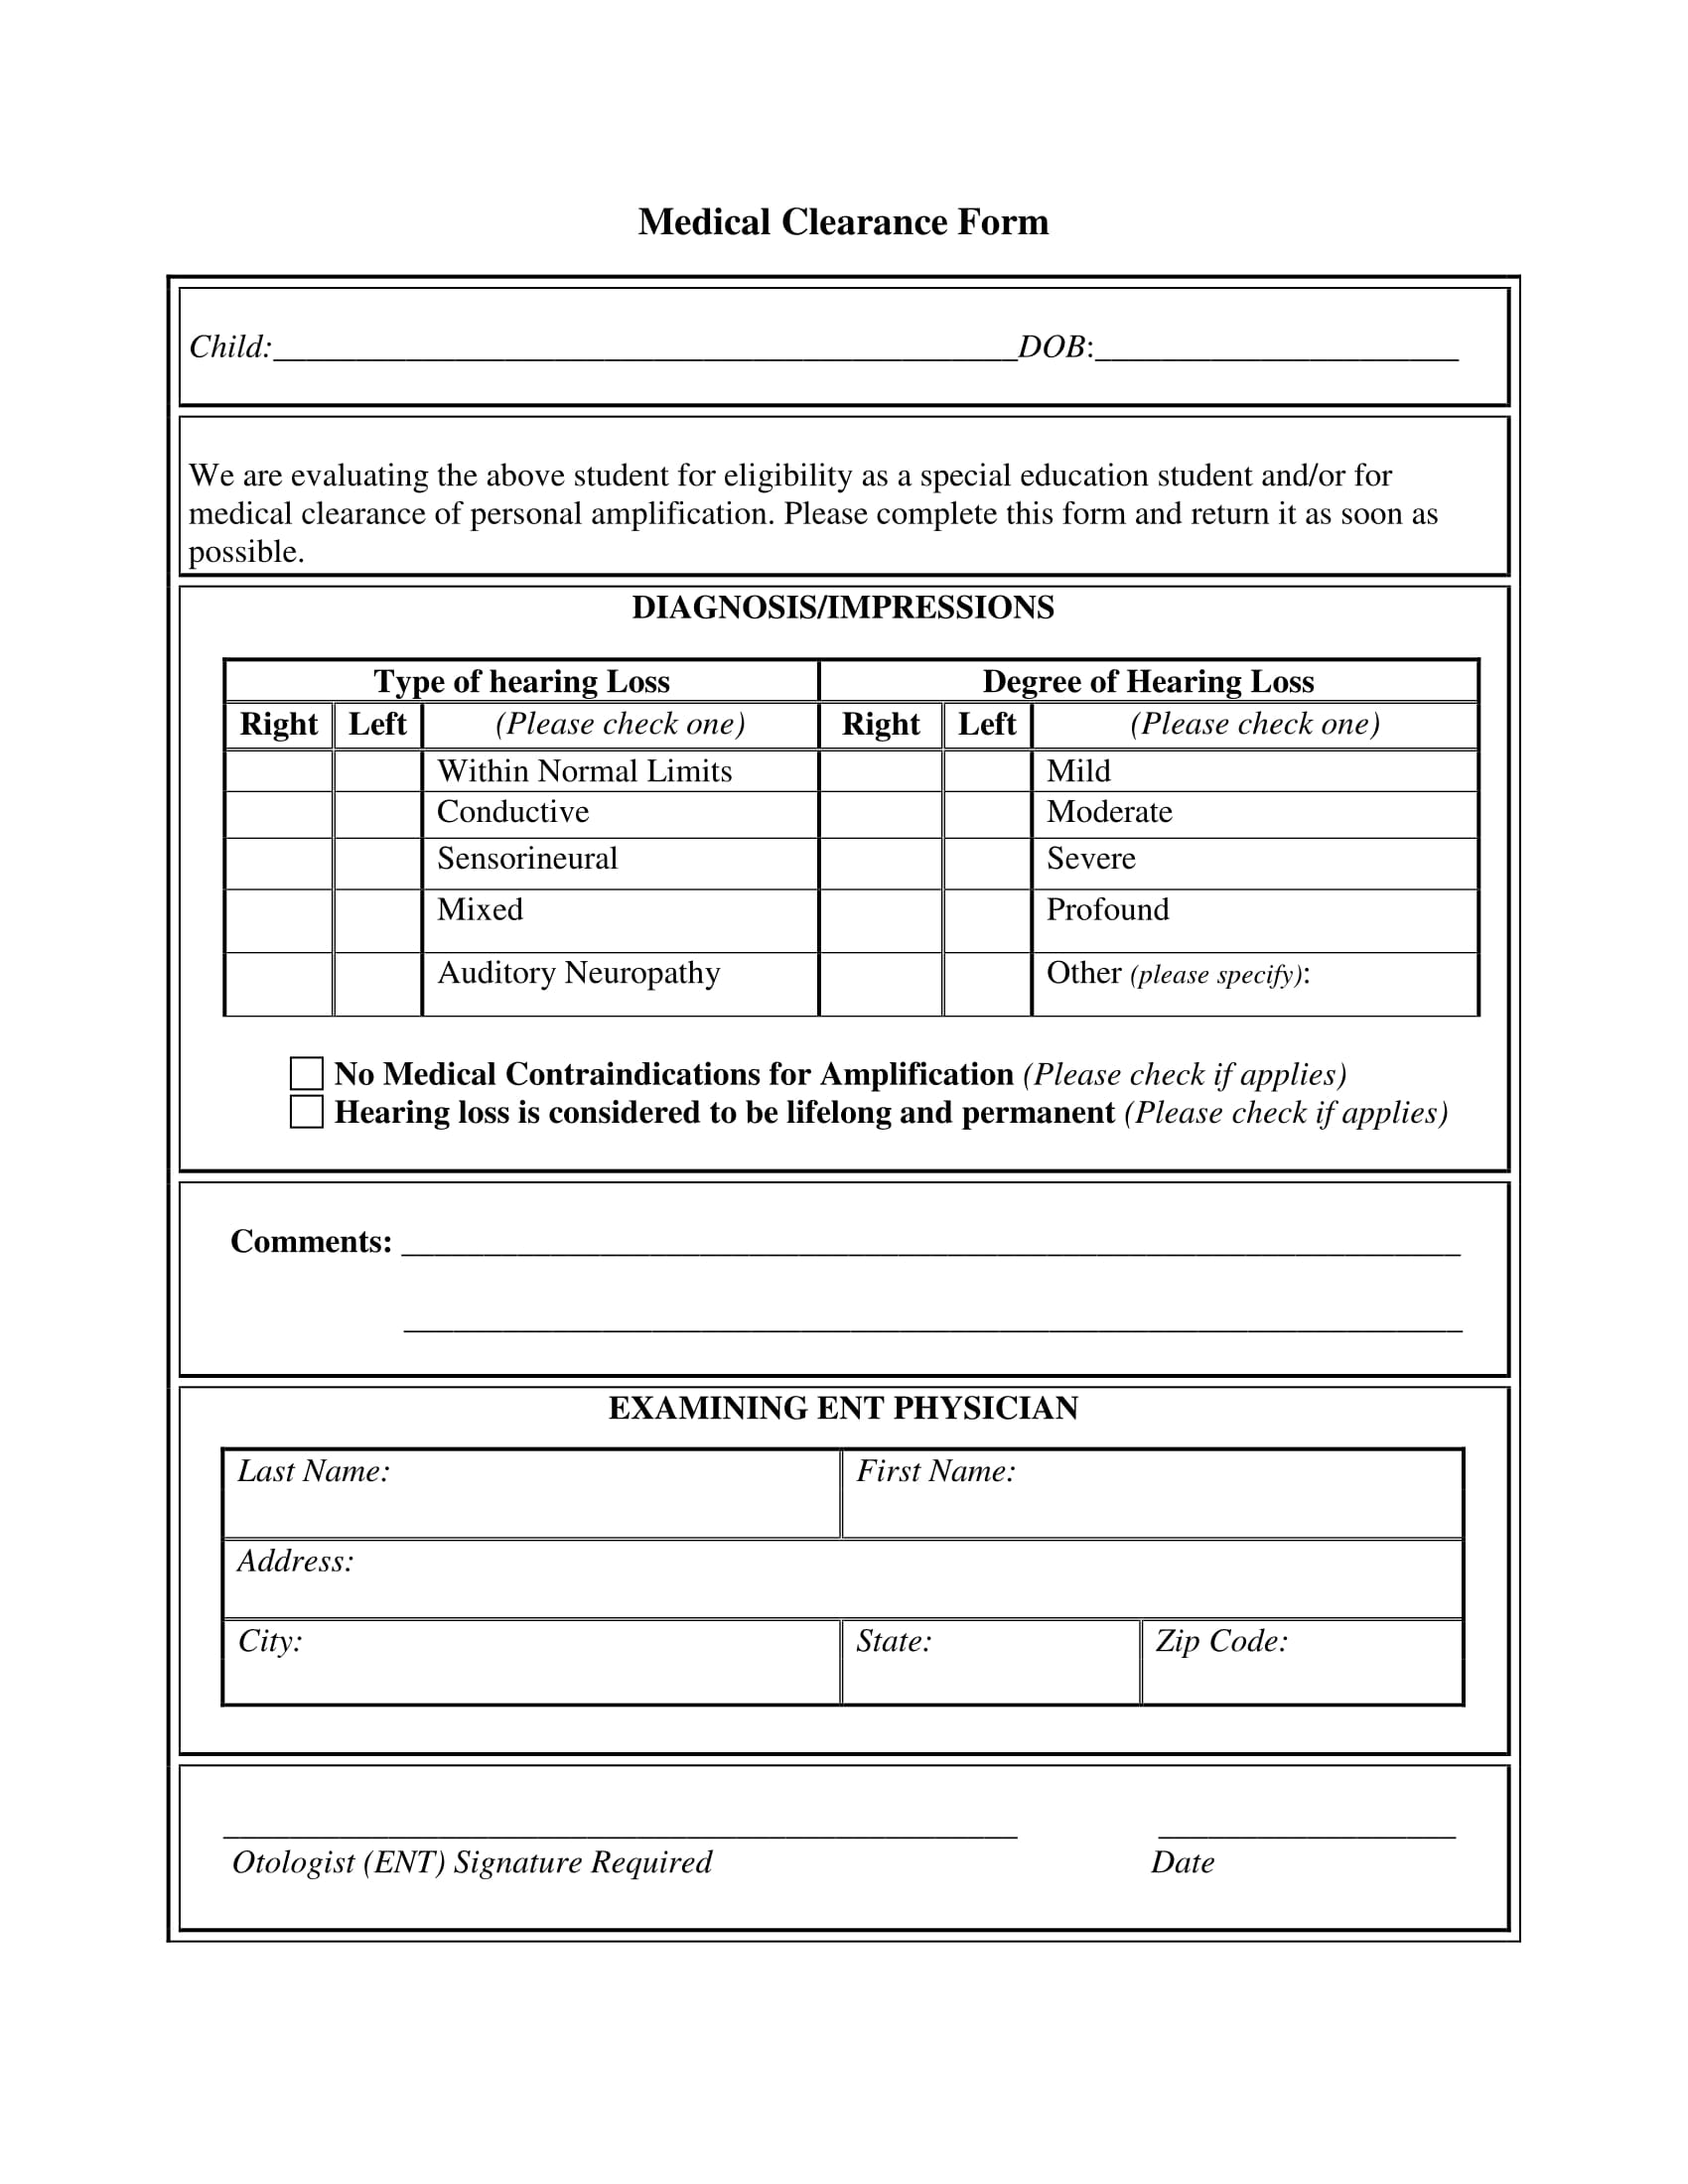 child medical clearance form 1